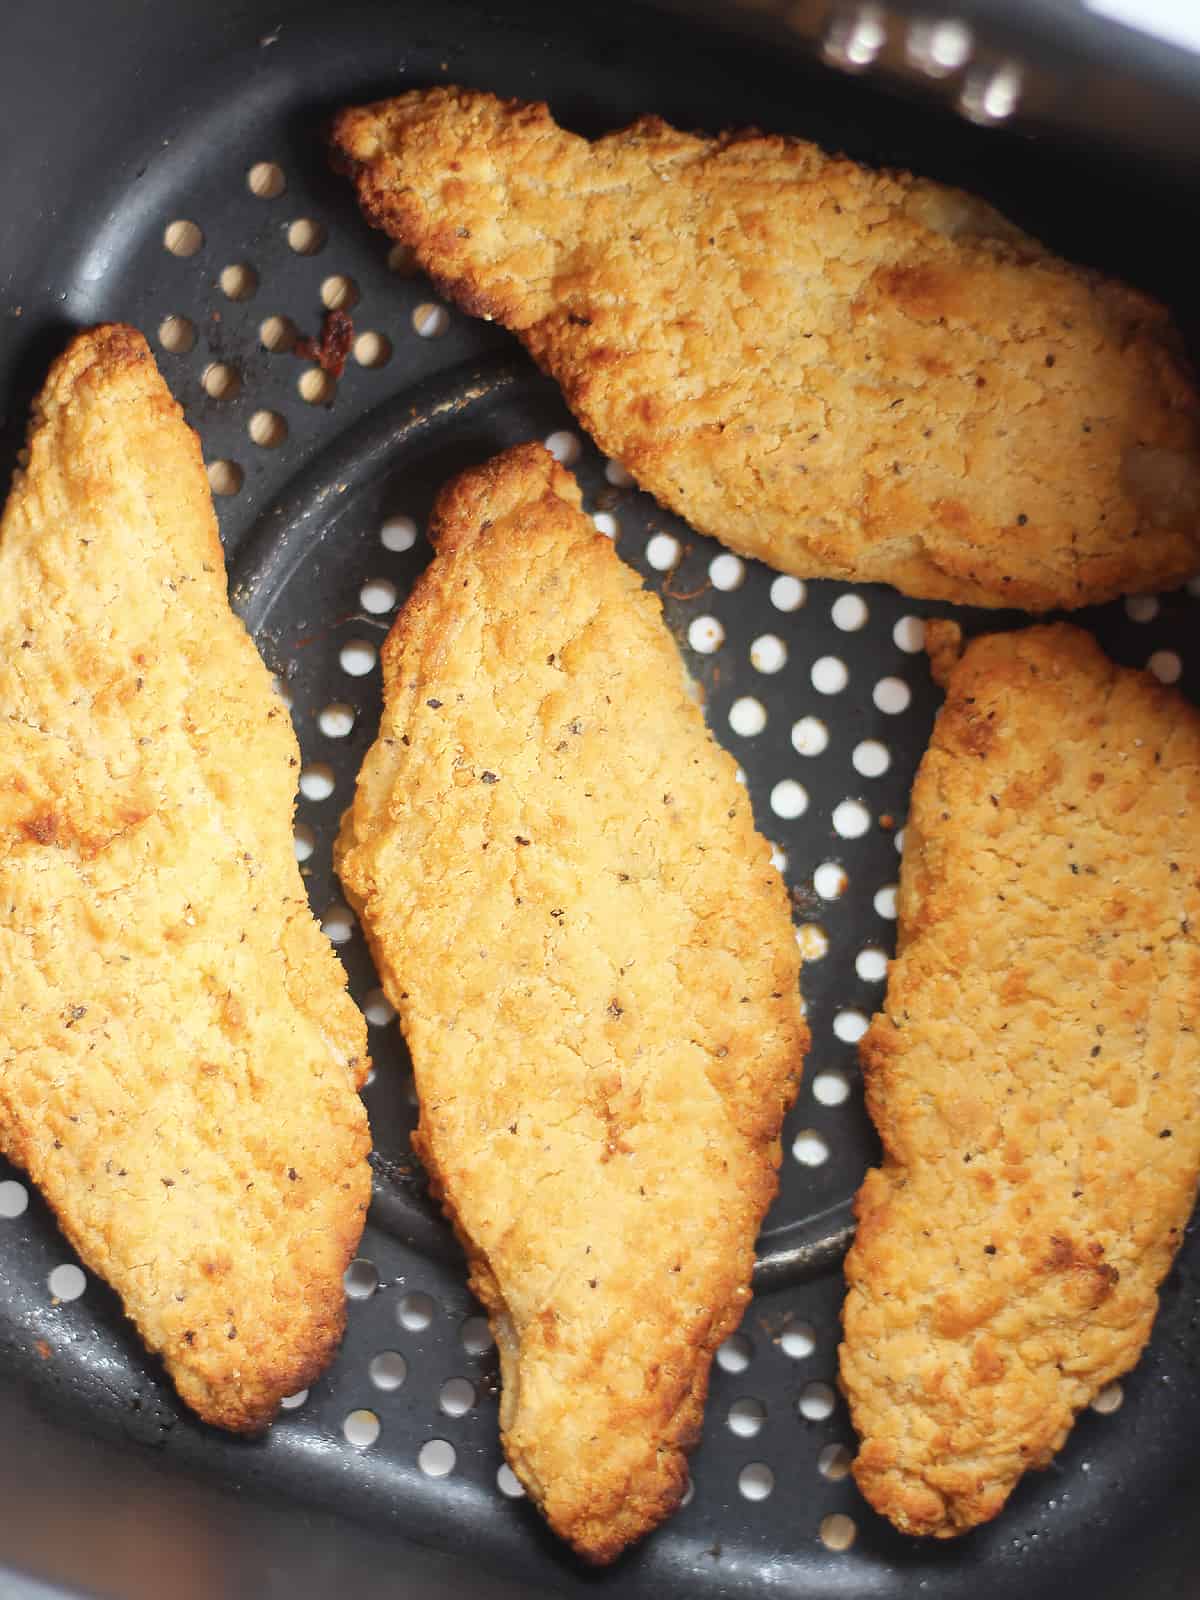 Four pieces of breaded fish cooked in the air fryer basket.